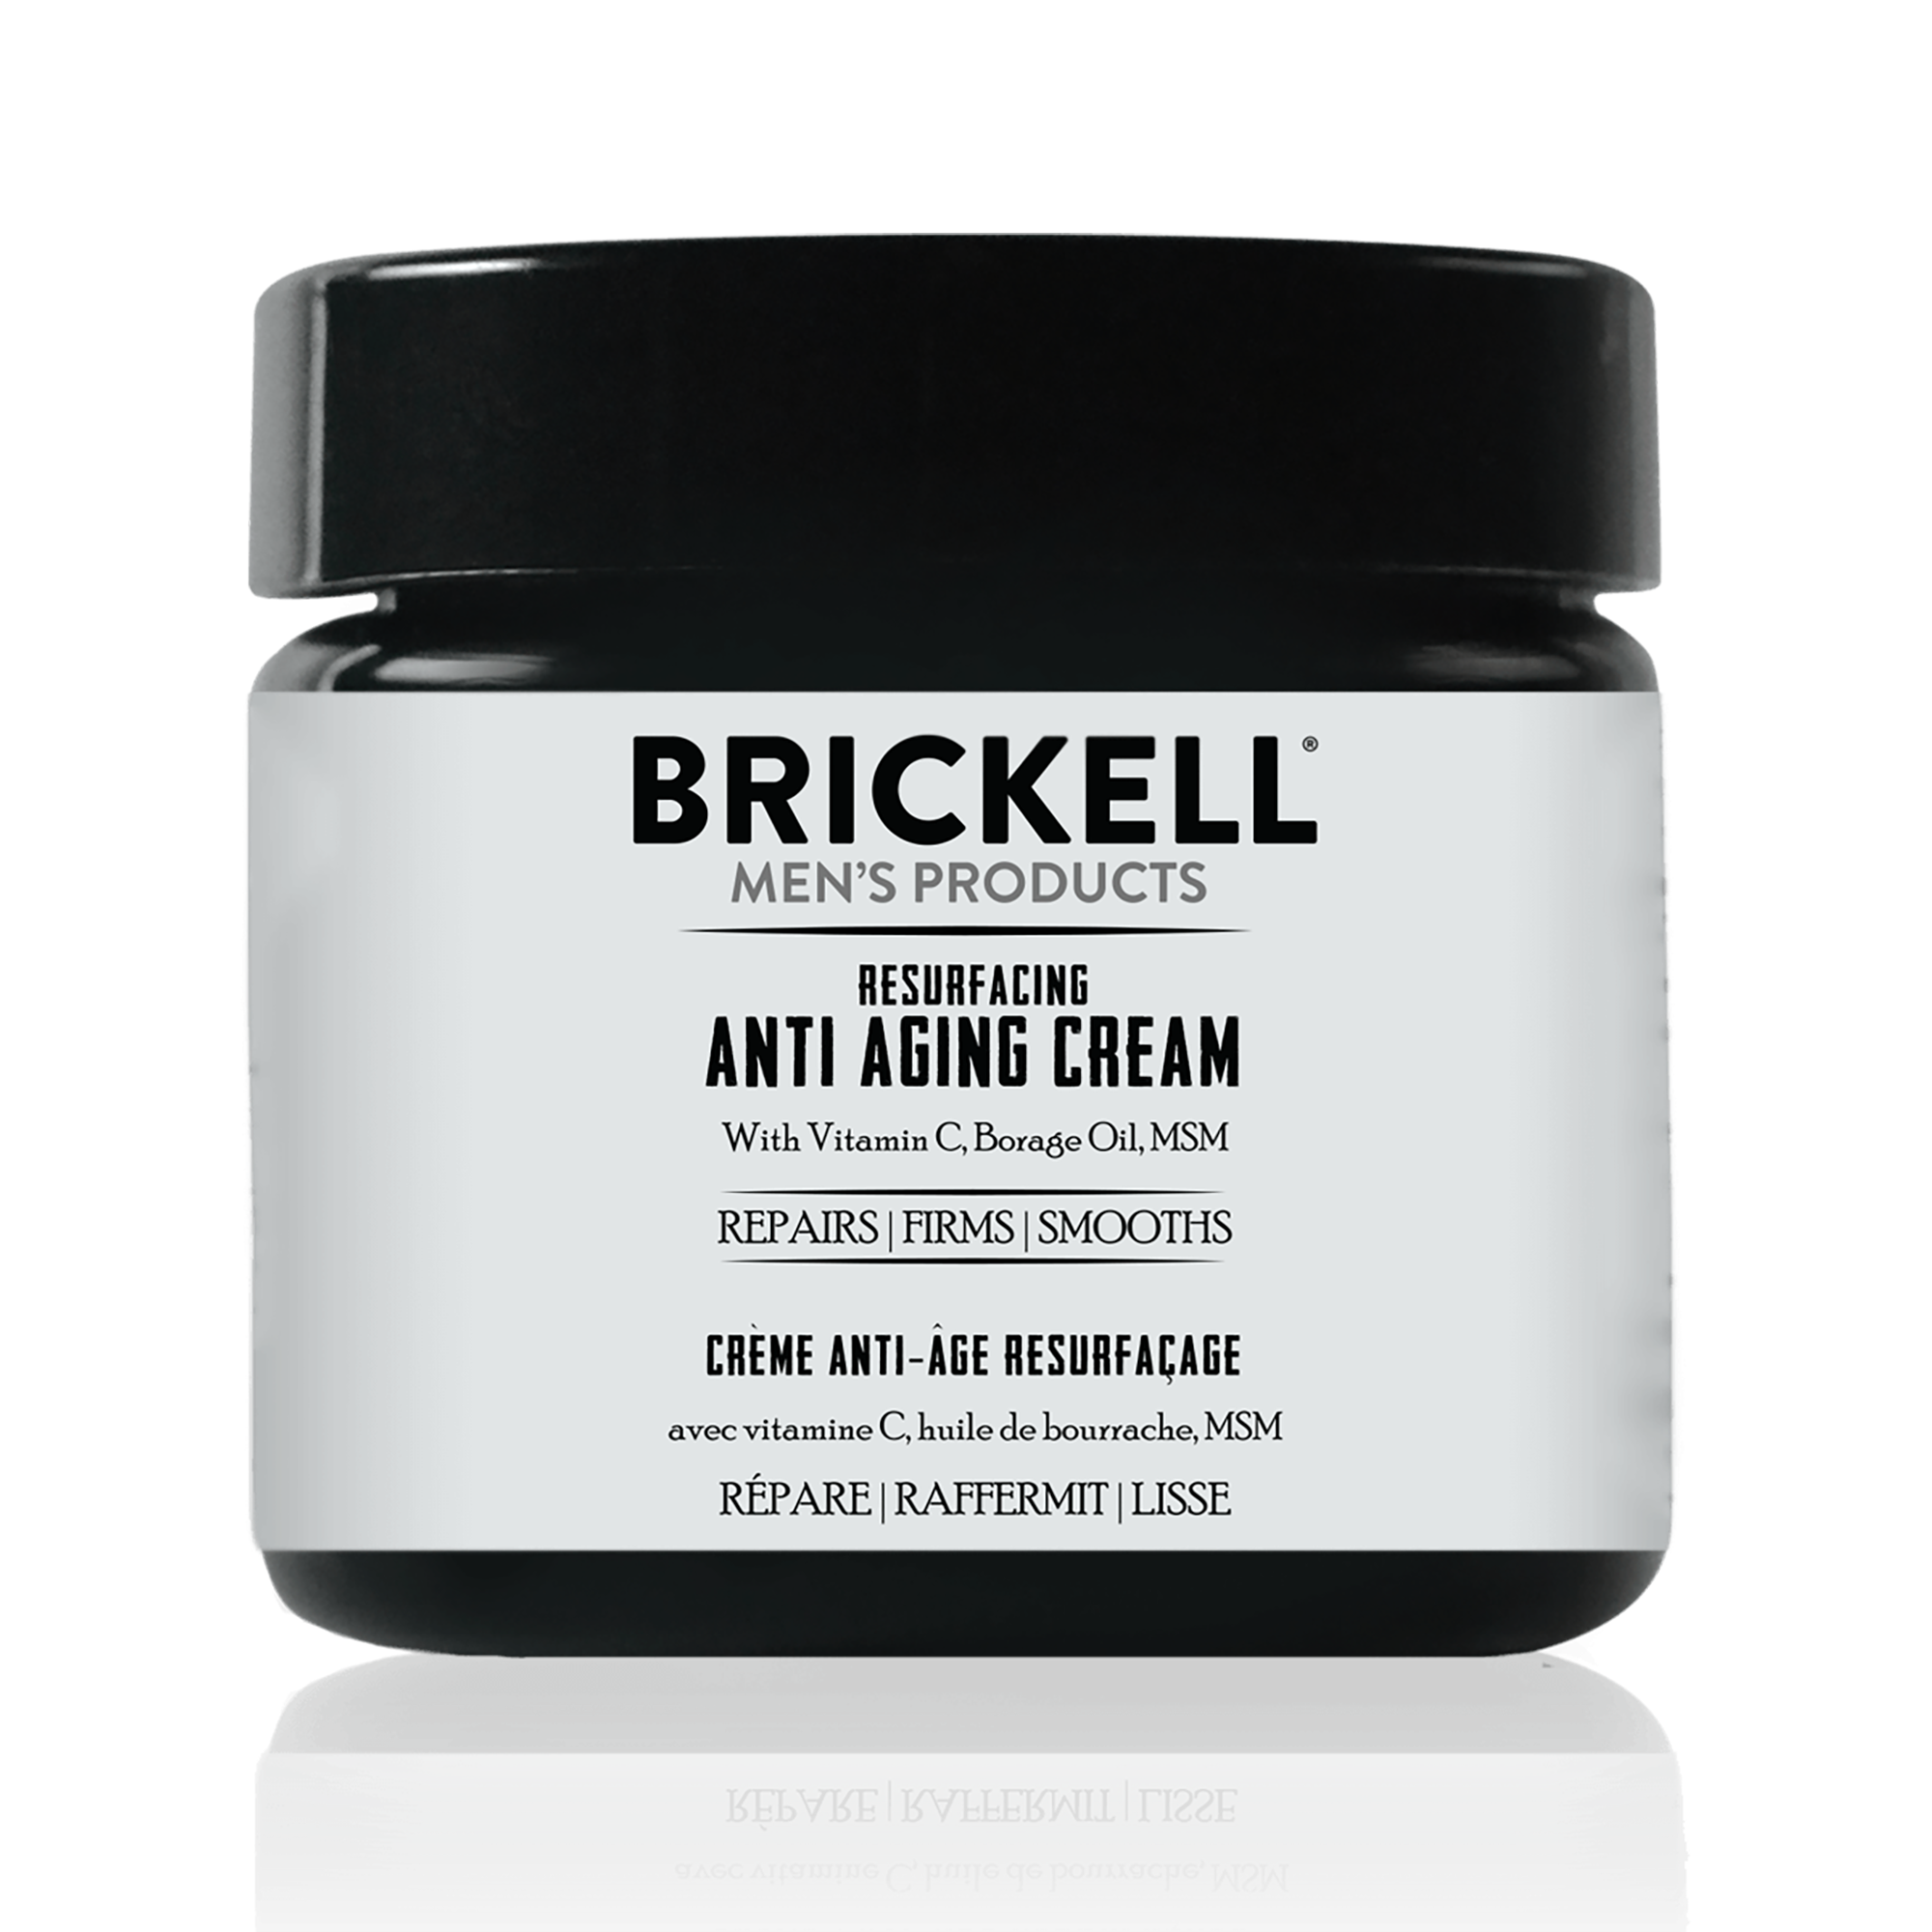 Brickell Men's Products Resurfacing Anti-Aging Face Cream For Men, Natural and Organic Face Moisturizer, Vitamin C Cream For Wrinkles, 2 oz, Scented - image 1 of 6